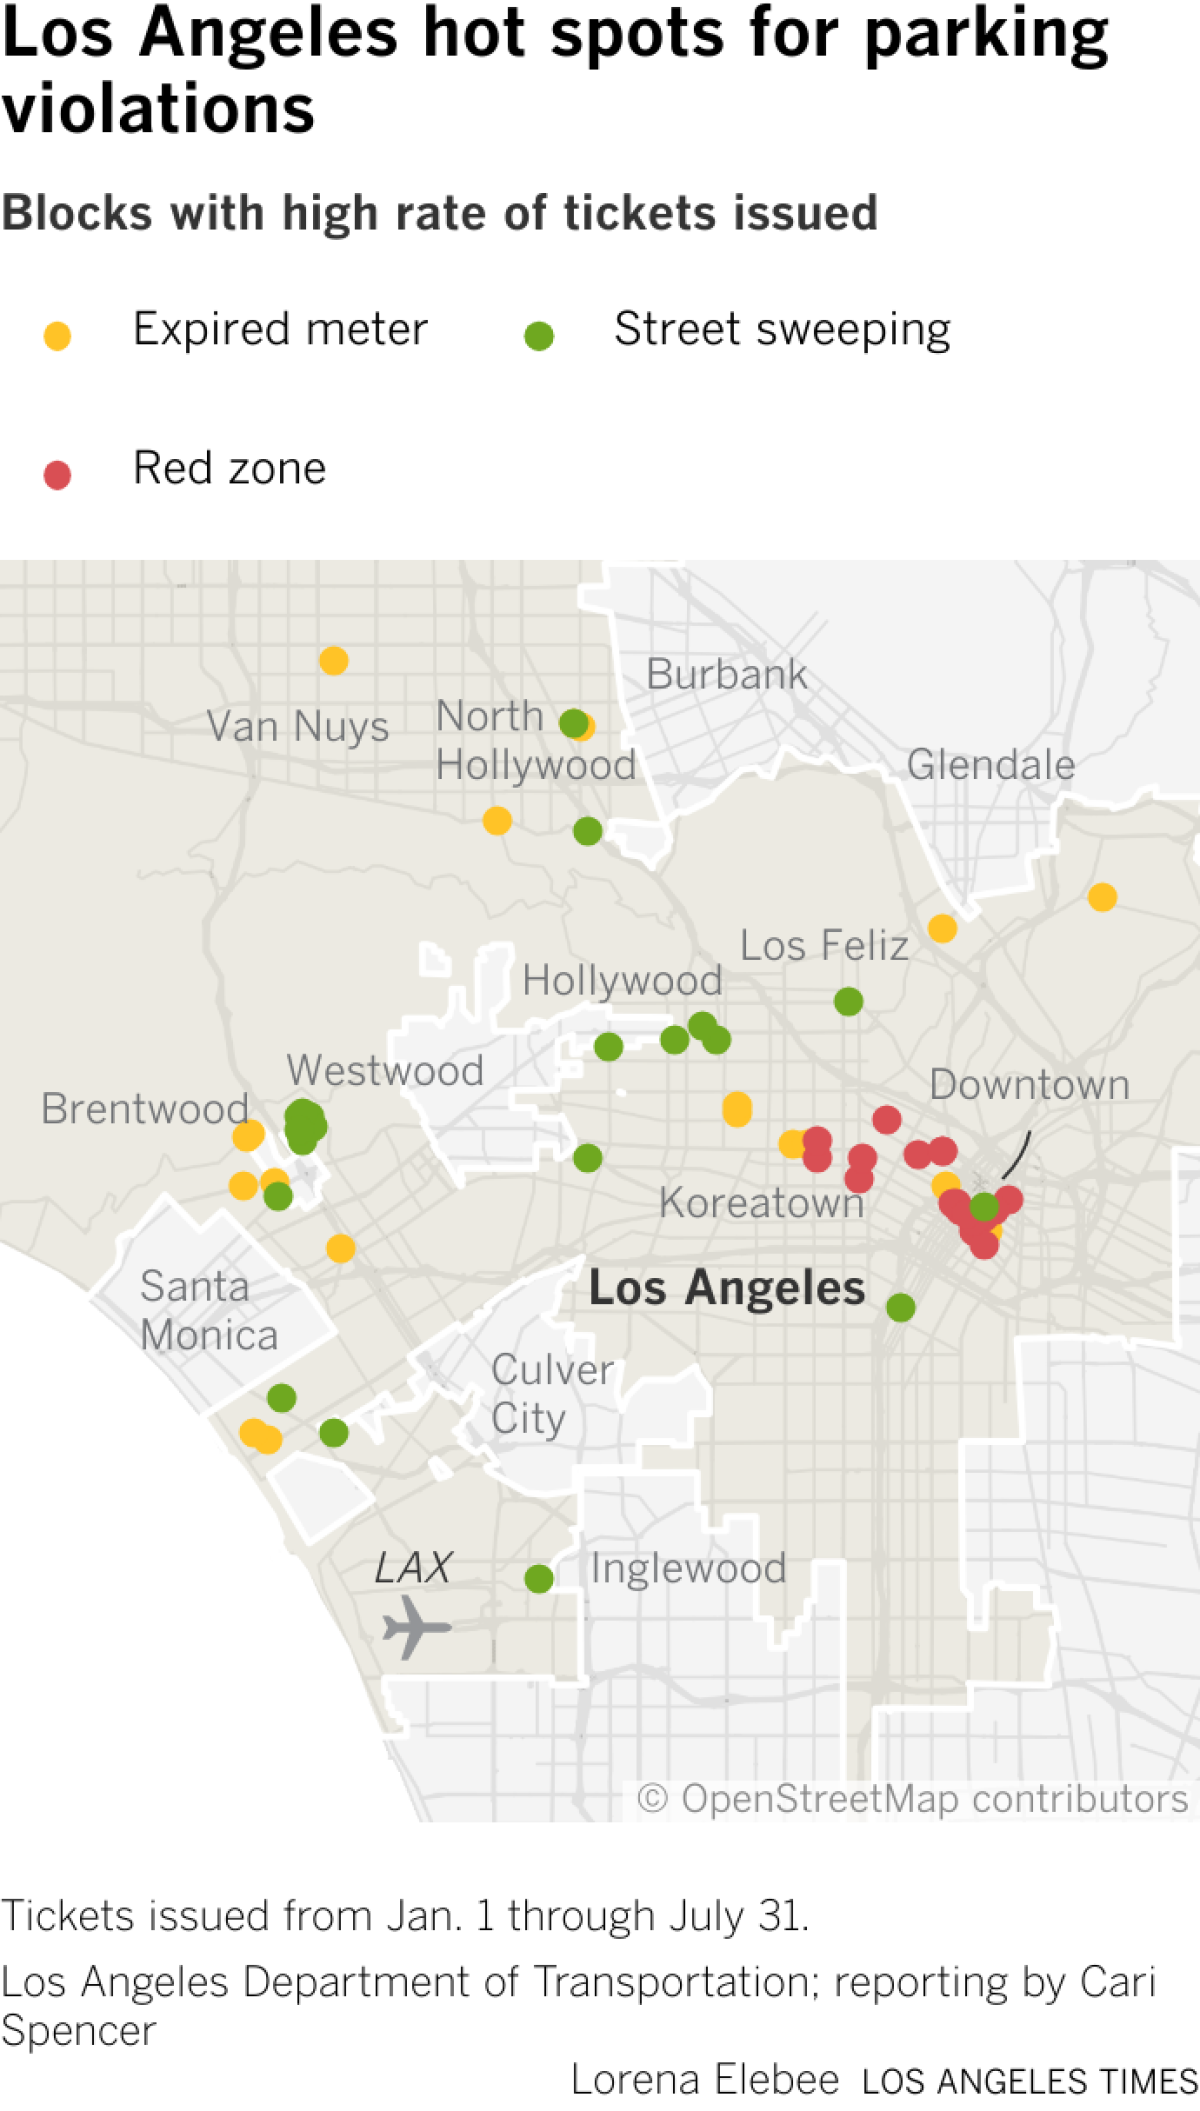 A map showing where the most parking tickets were issued within the city of Los Angeles.